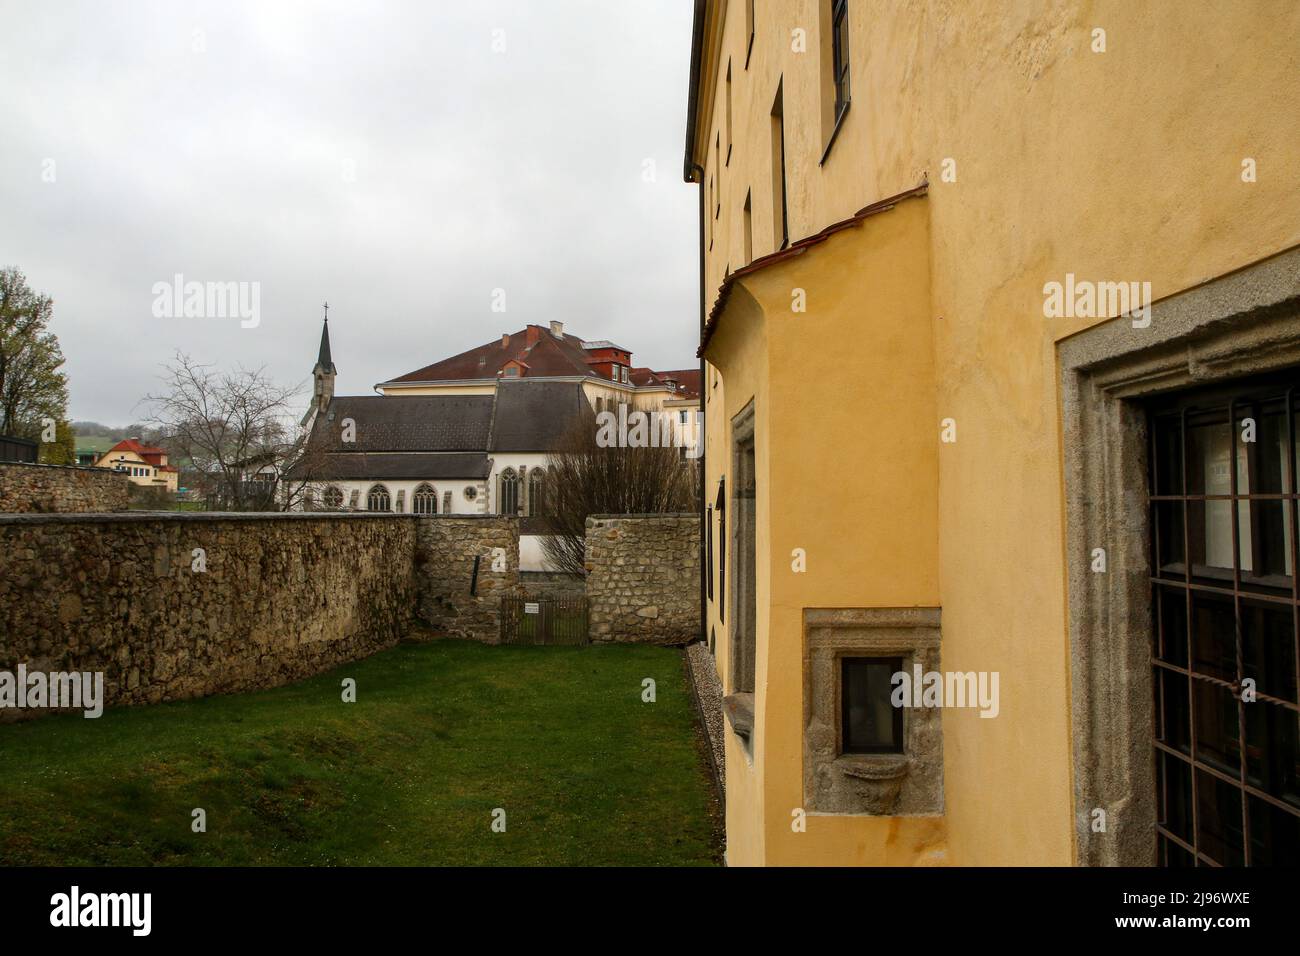 The picture from the Austrian city of Freistadt during early spring with the sights like the castle or gates to the city center. Stock Photo